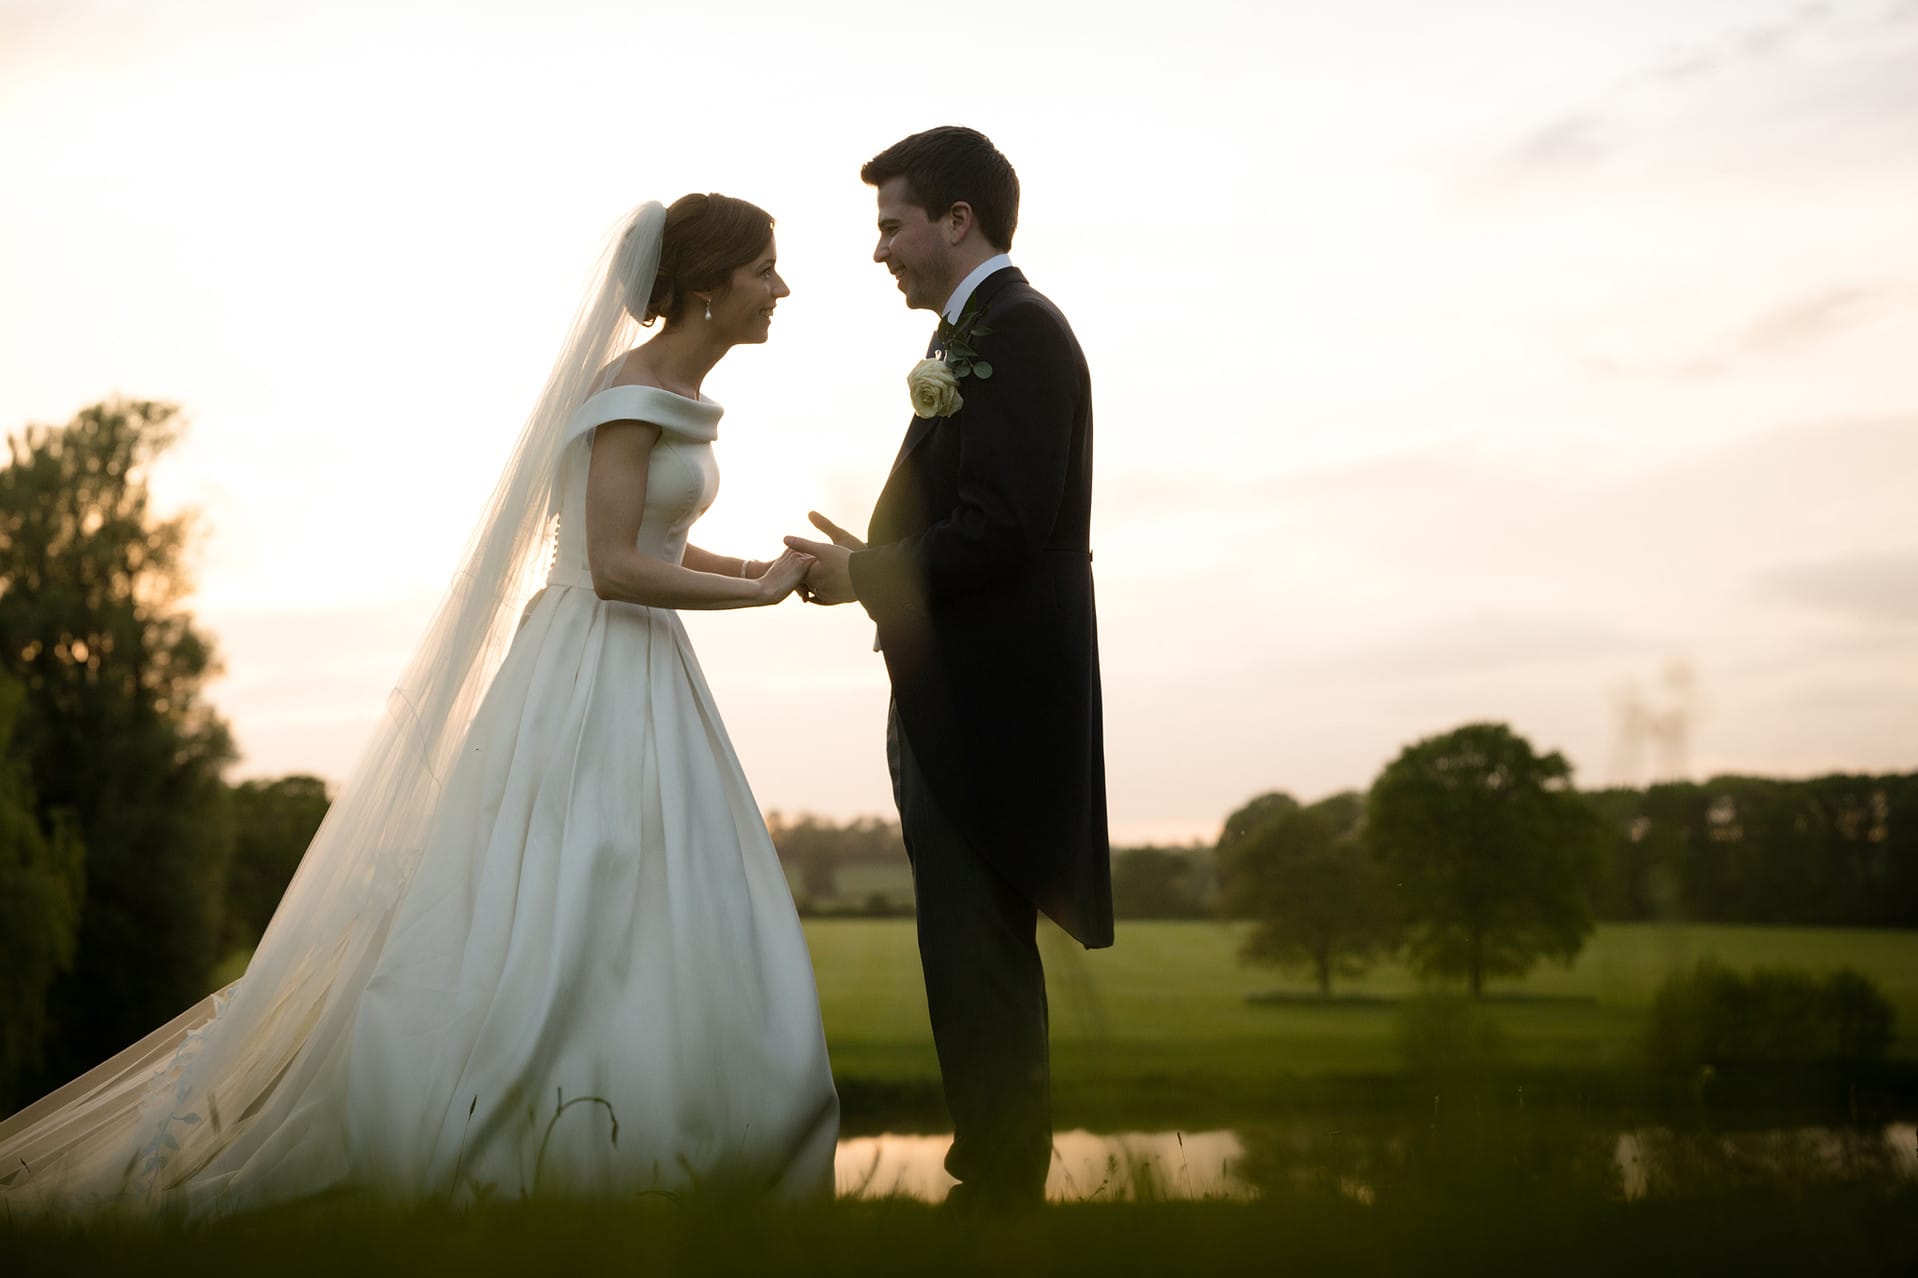 The bride and groom chatting together and holding hands during golden hour by the lake at Kelmarsh Hall